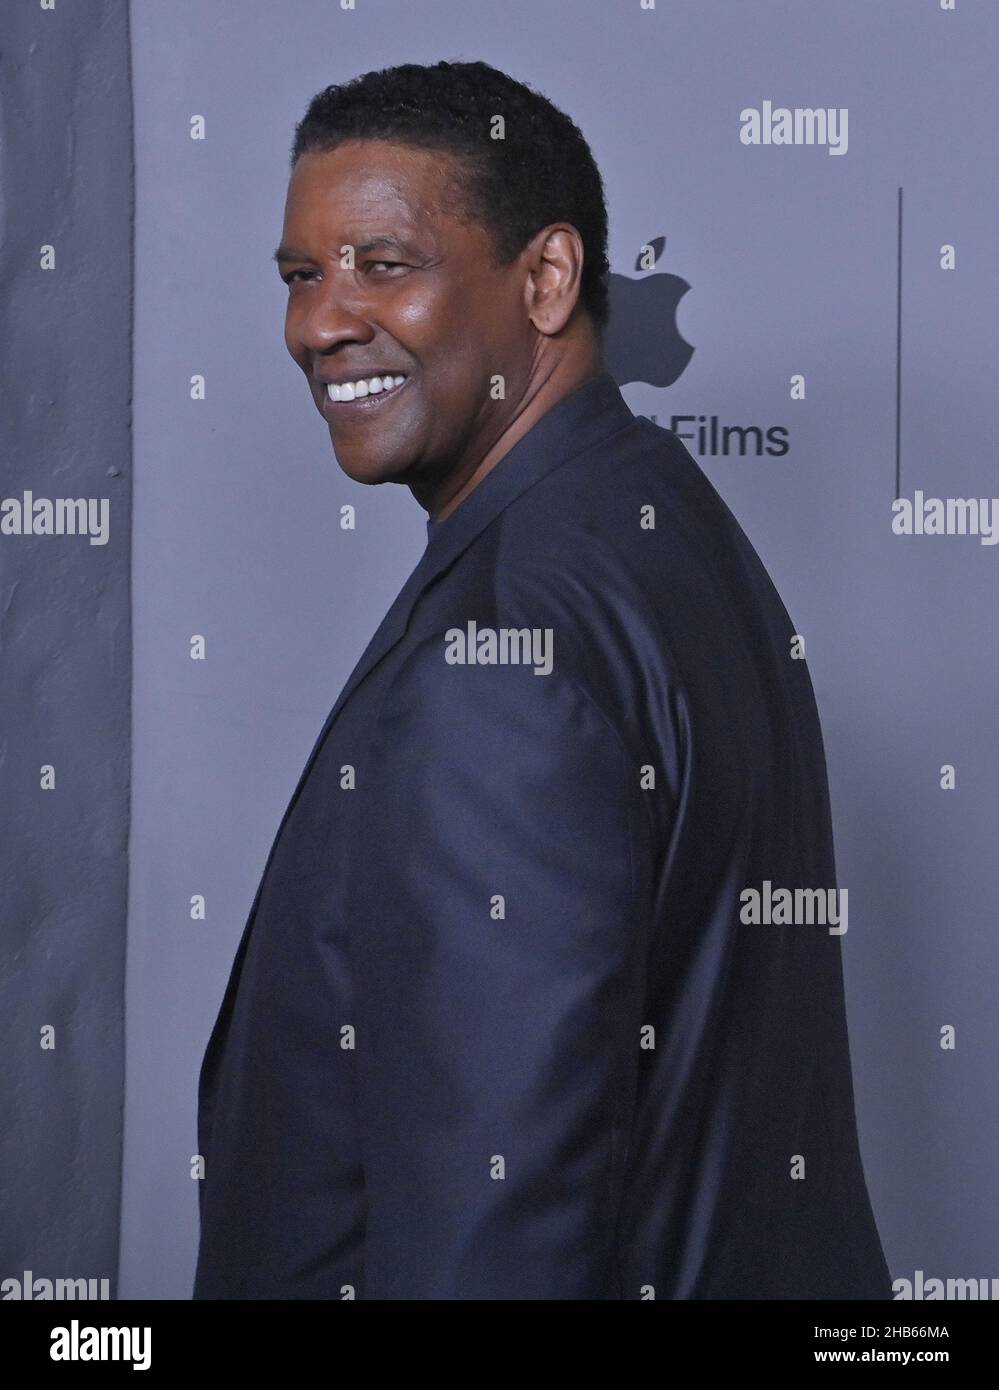 Los Angeles, USA. 17th Dec, 2021. Cast member Denzel Washington attends the premiere of the motion picture historical war thriller 'The Tragedy of Macbeth' at the DGA Theatre in Los Angeles on Thursday, December 16, 2021. Storyline: A Scottish lord becomes convinced by a trio of witches that he will become the next King of Scotland, and his ambitious wife supports him in his plans of seizing power. Photo by Jim Ruymen/UPI Credit: UPI/Alamy Live News Stock Photo